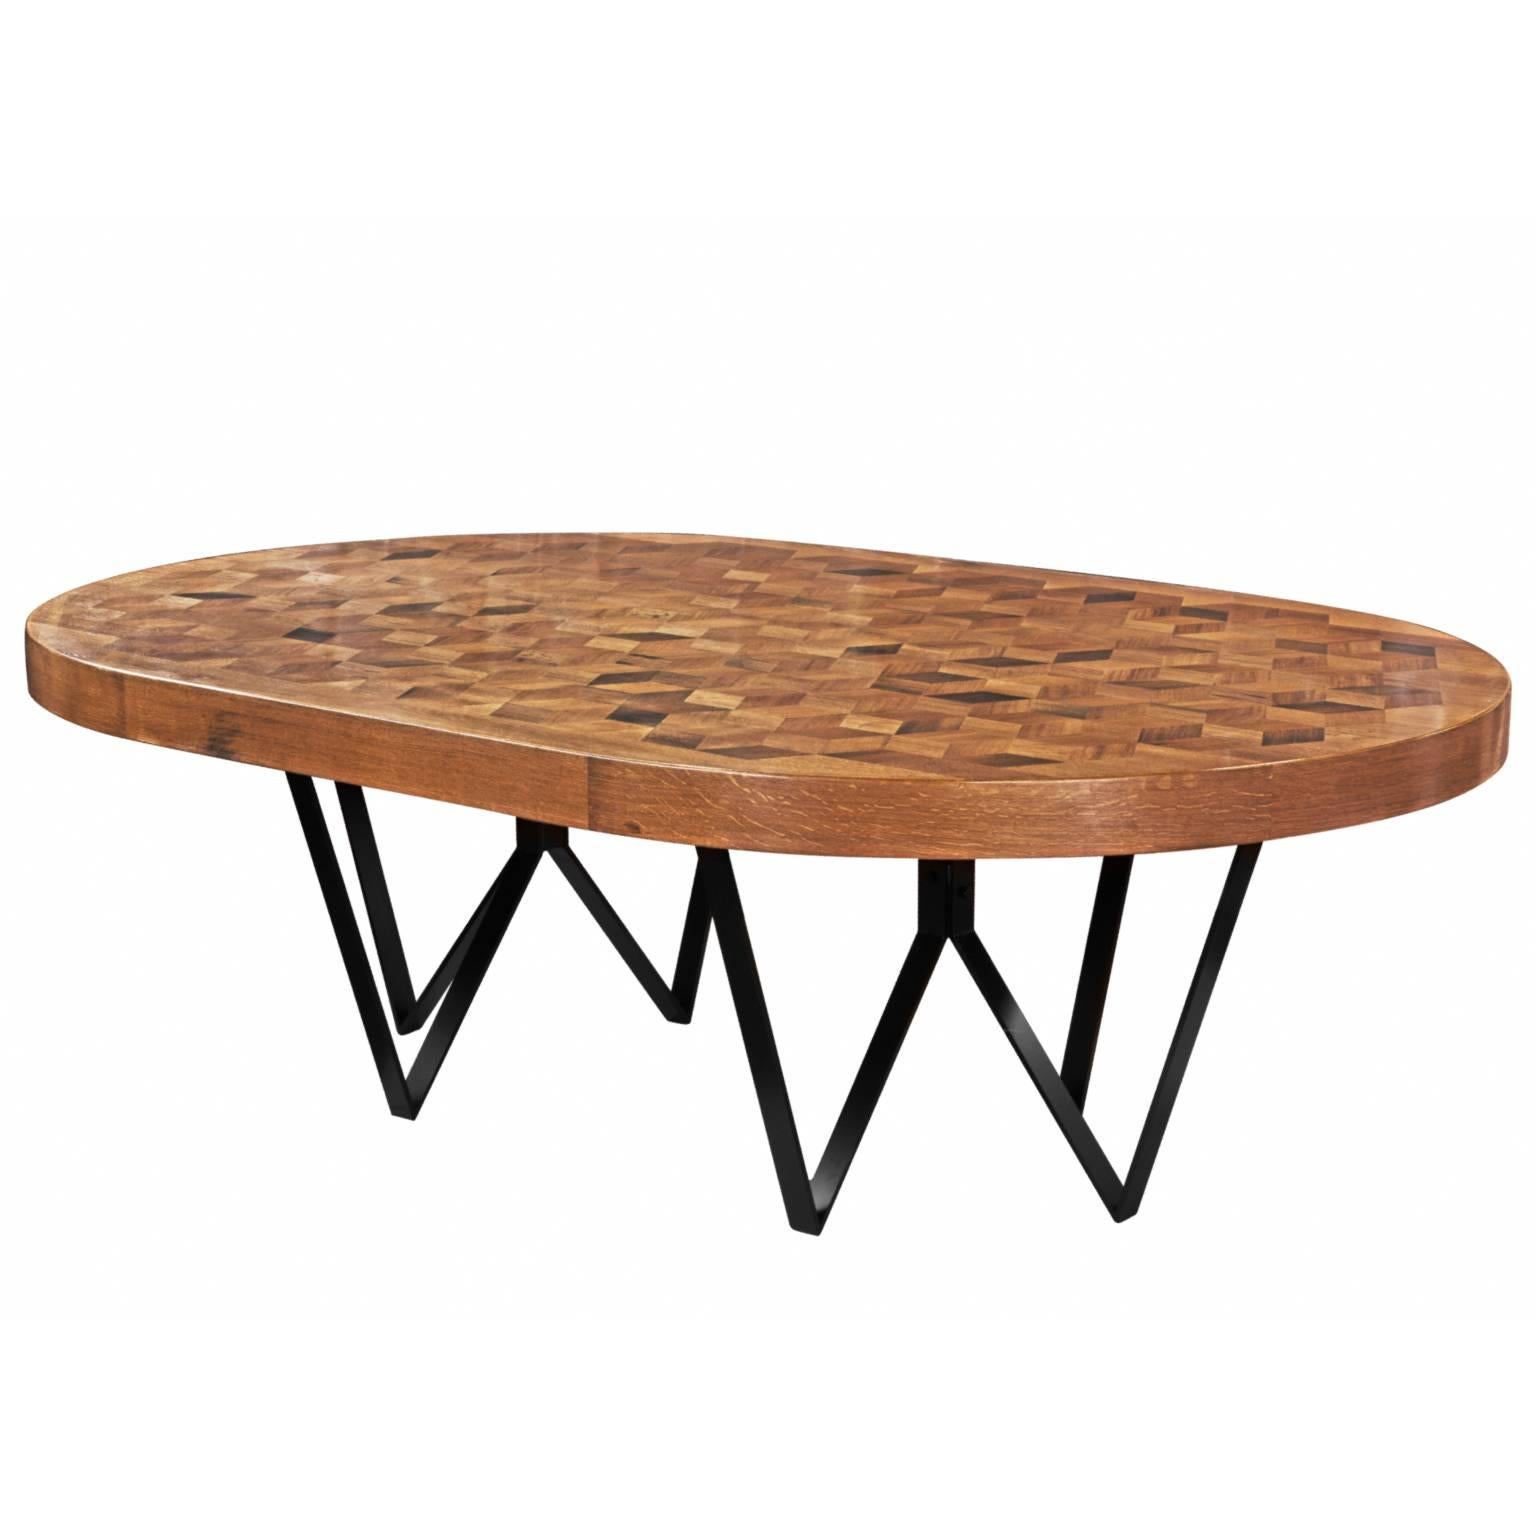 Maurits Oval Marquetry Table in Reclaimed Oak from Old Italian Wine Barrels